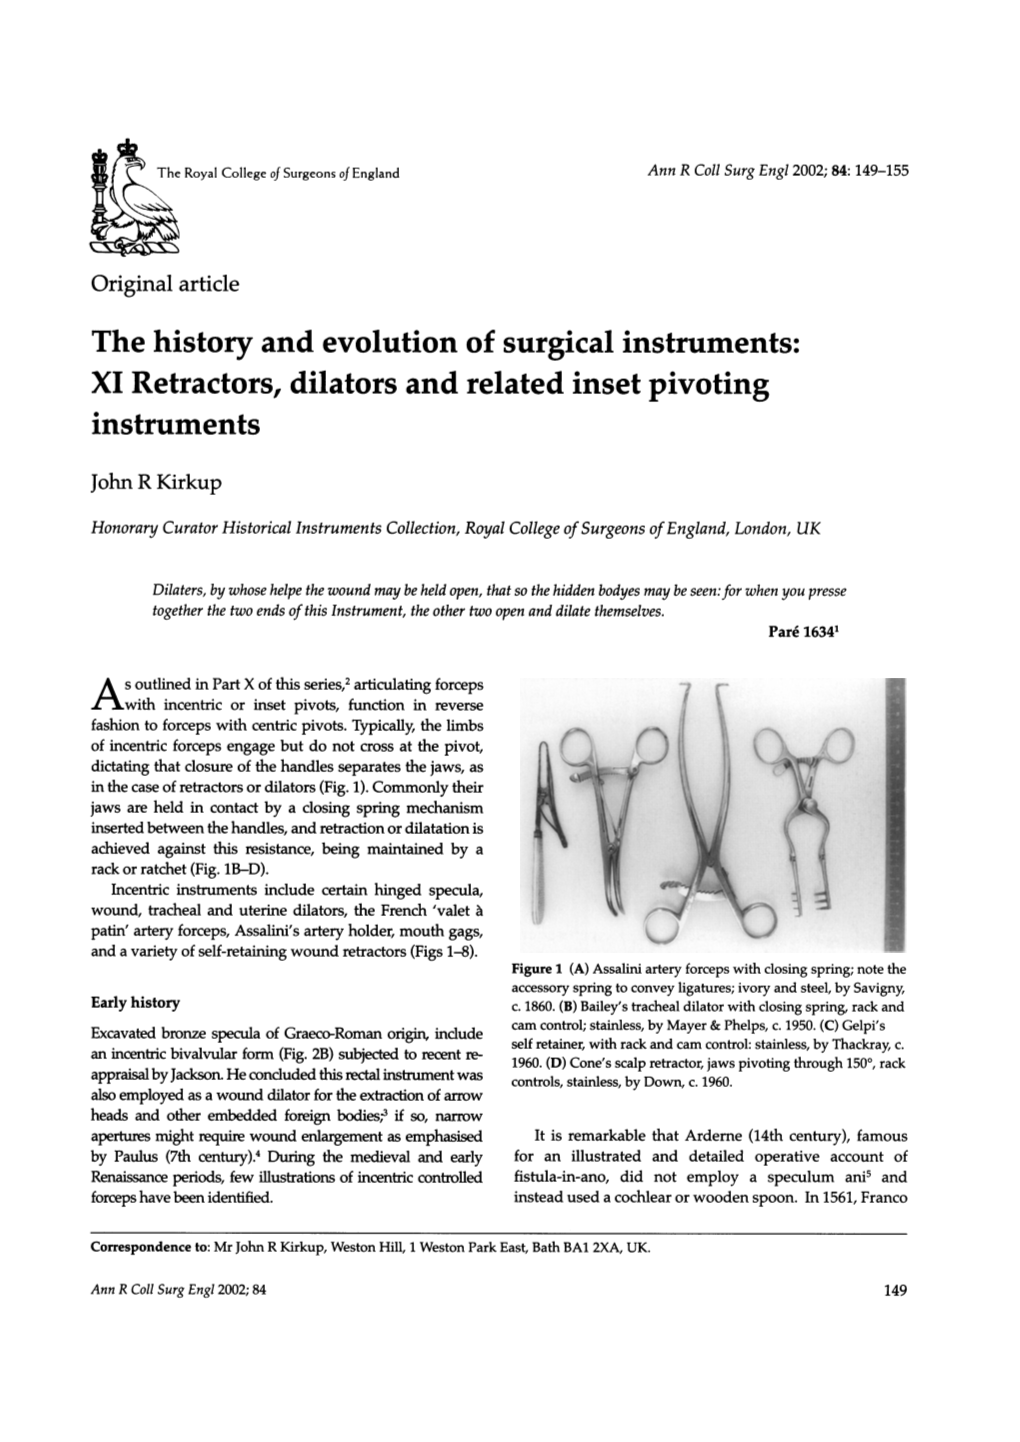 The History and Evolution of Surgical Instruments: XI Retractors, Dilators and Related Inset Pivoting Instruments